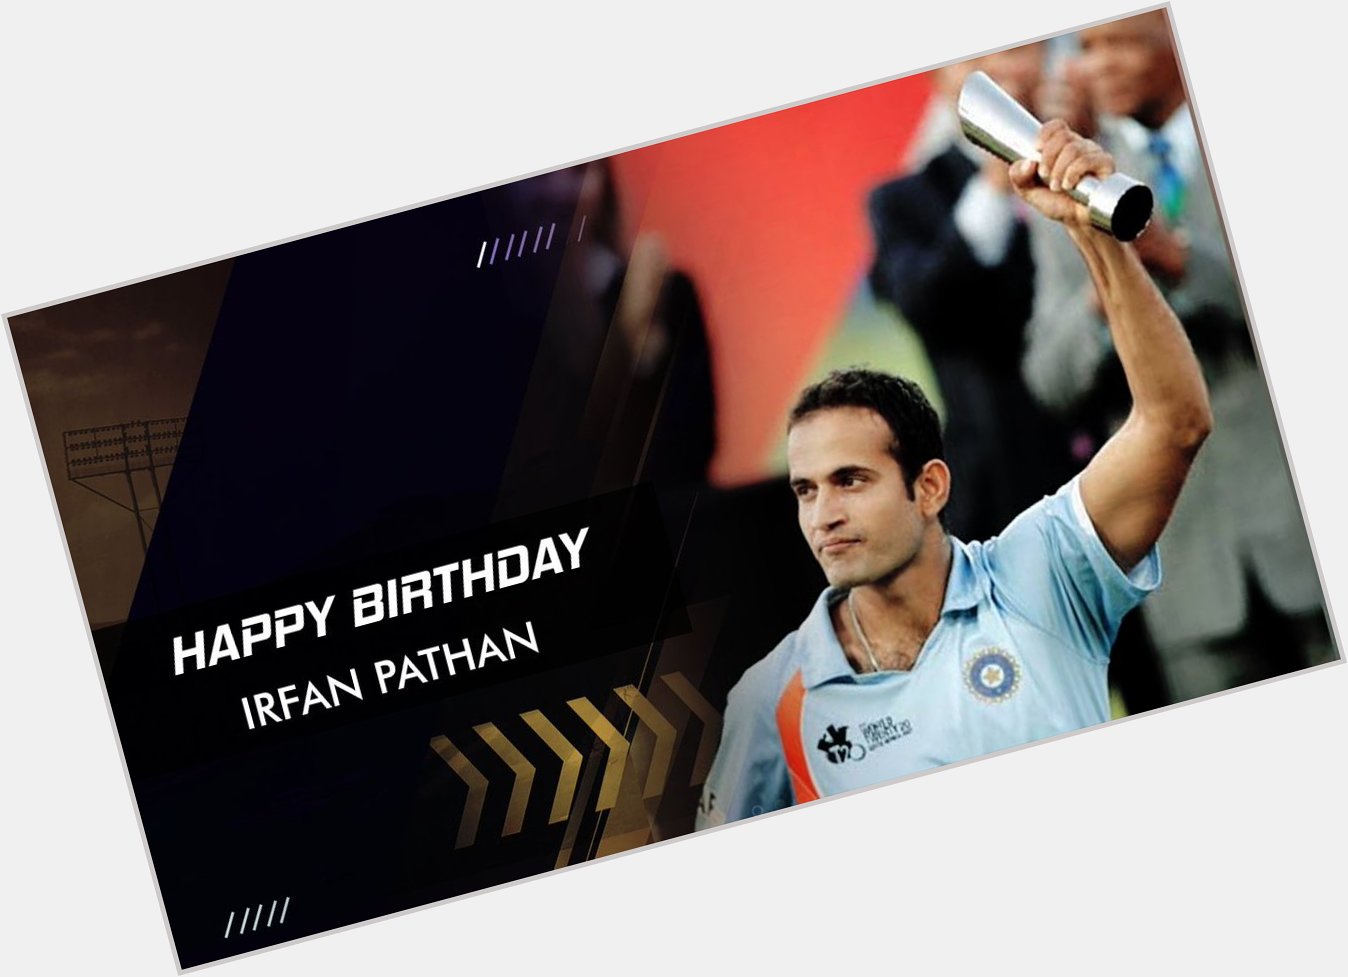 Happy Birthday!! Irfan Pathan

Man of the Match in the 2007 World T20 Final 